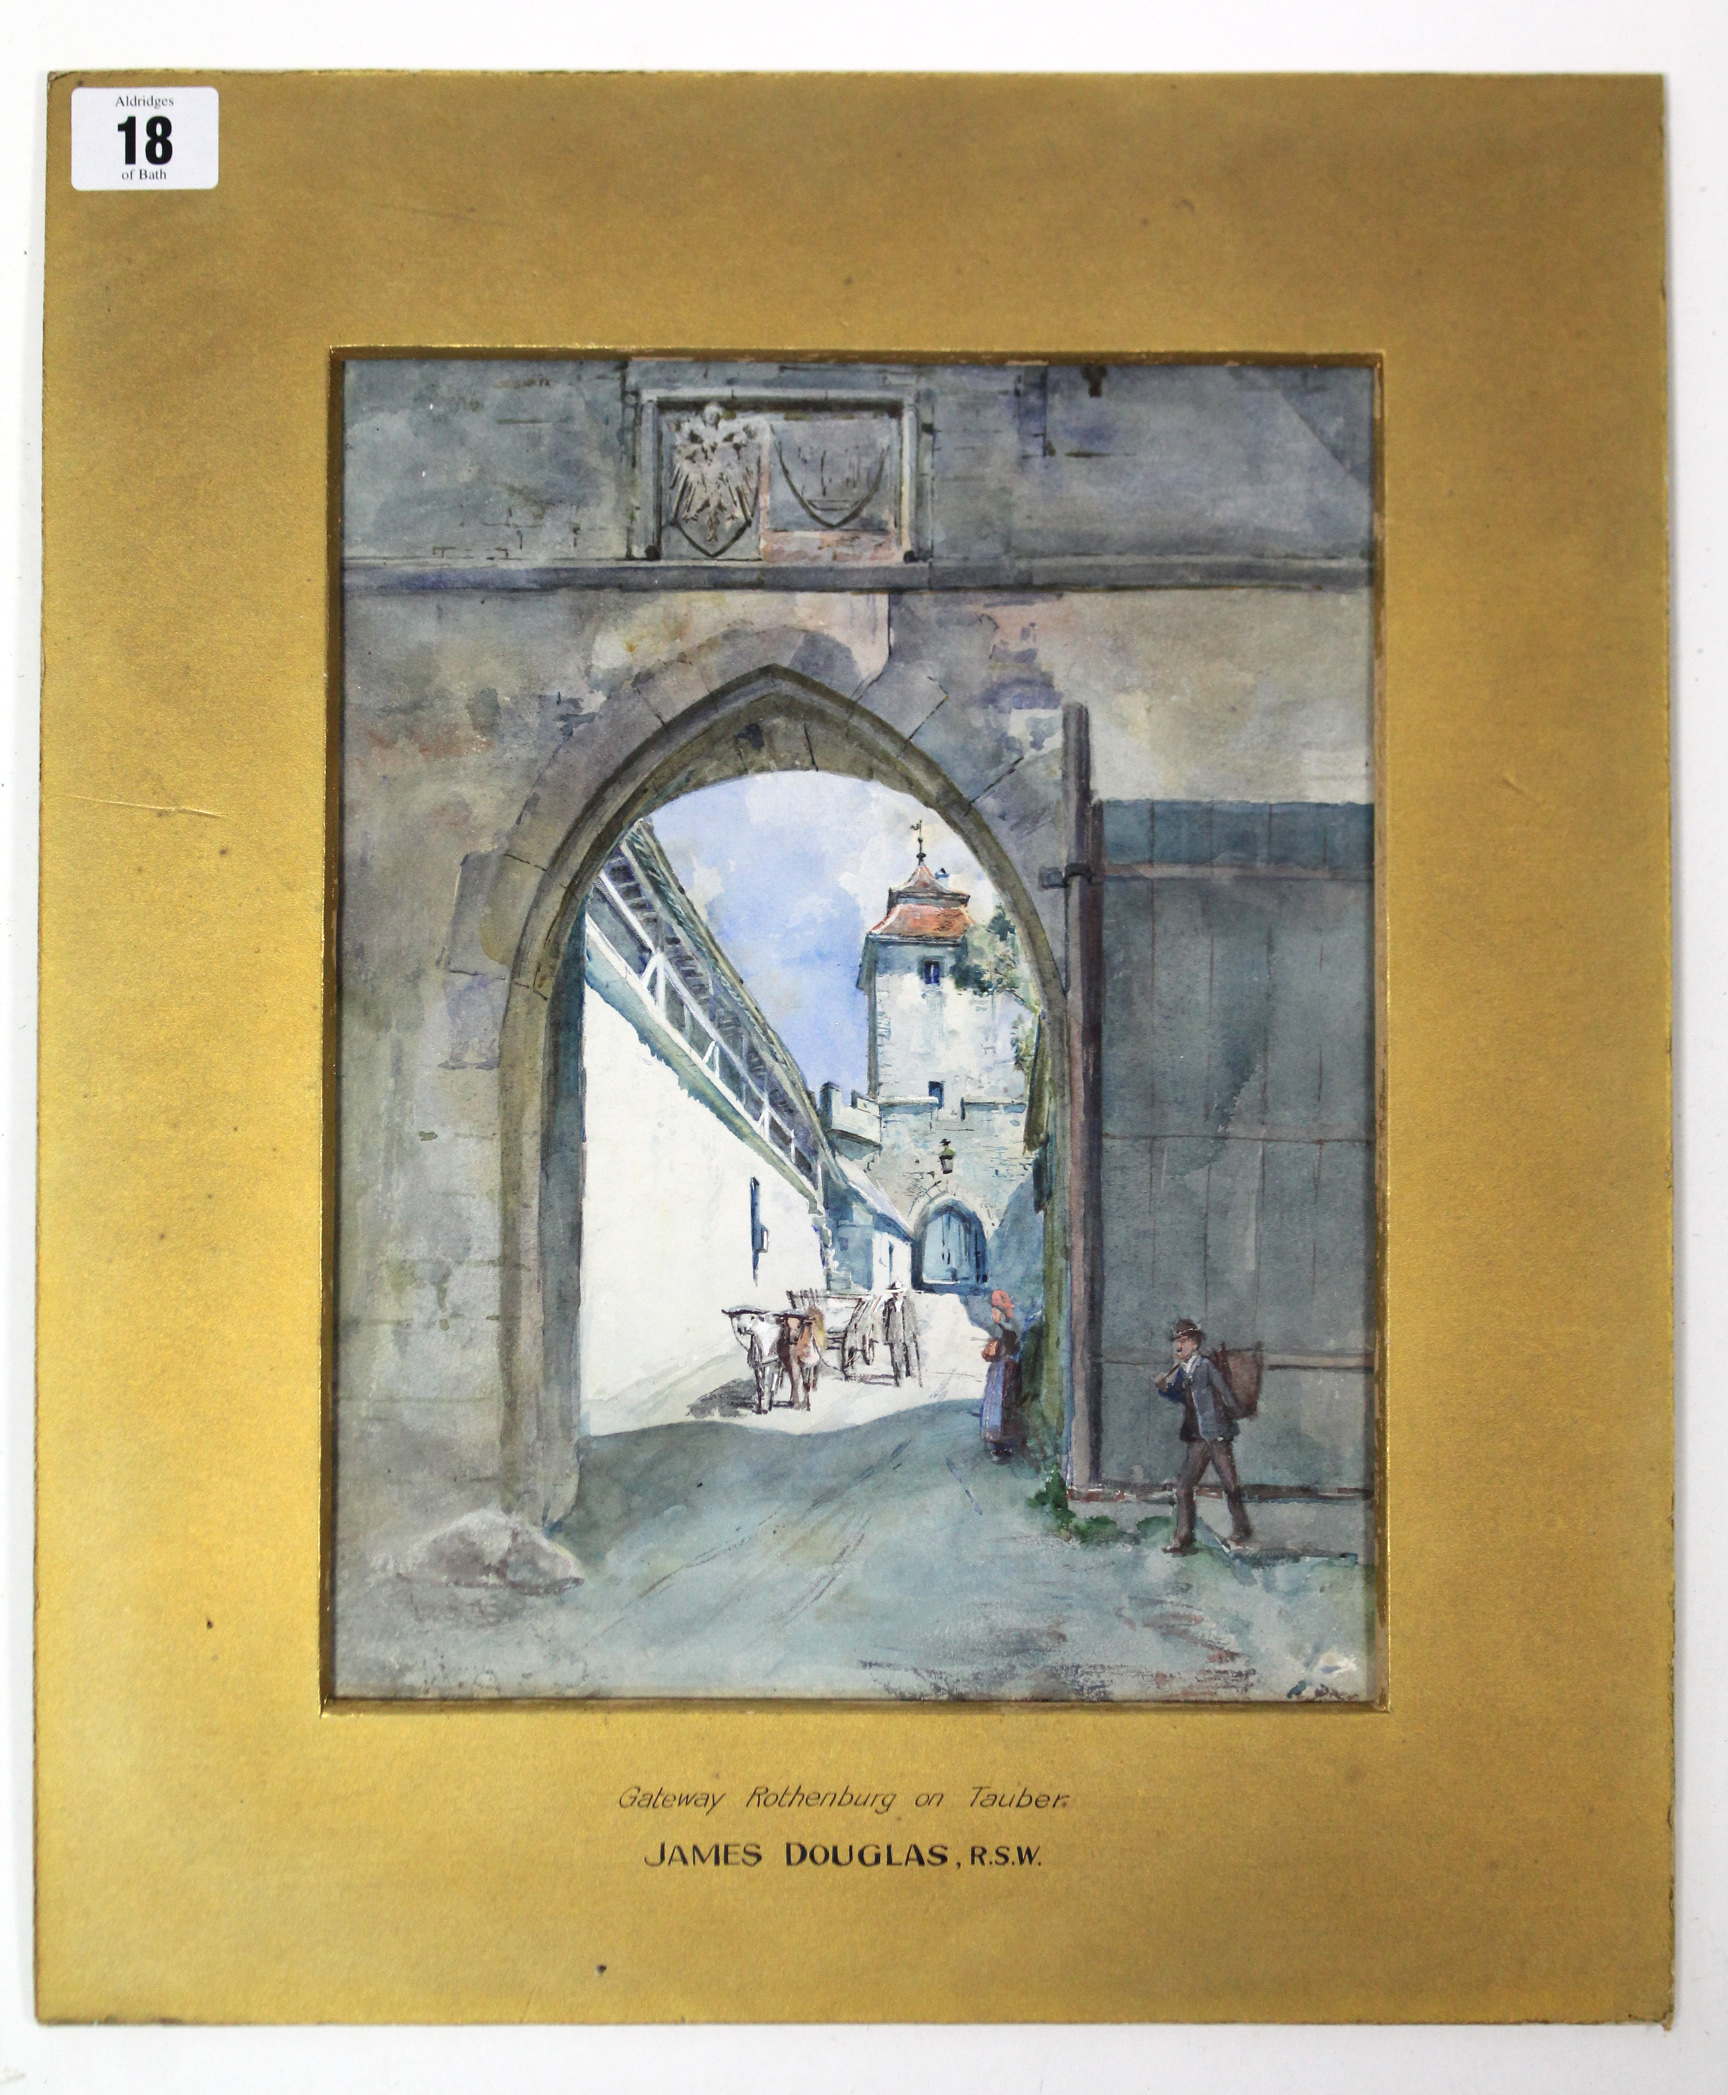 A late 19th/early 20th century watercolour painting by James Douglas, R.S.W. titled “Gateway